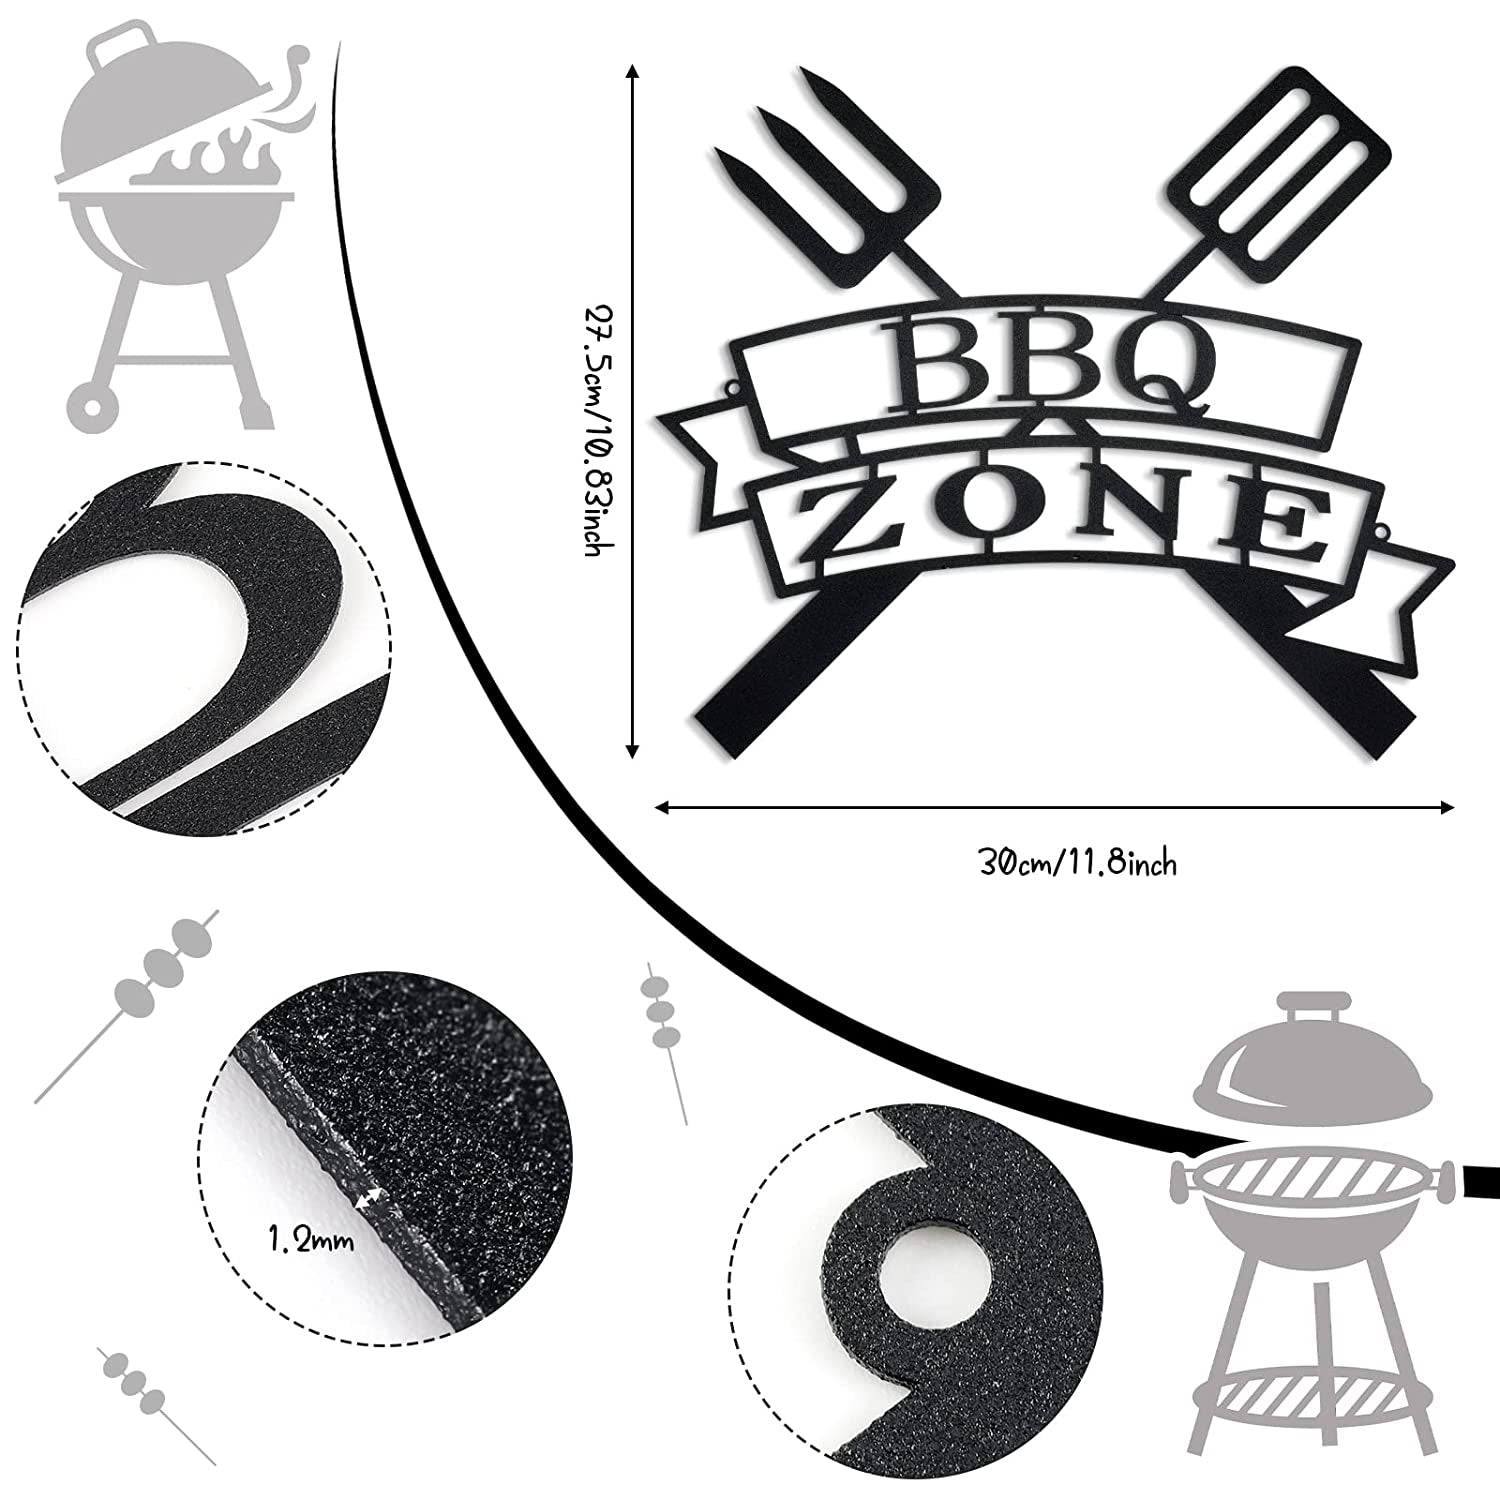 Funrous, Metal BBQ Sign round Grill BBQ Metal Sign Barbecue Monogram Wall Decor BBQ Zone Retro Kitchen Metal Signs Hanging Grill Barbecue Sign for Outdoor Backyard Kitchen Wall Art Decoration (Simple Style)